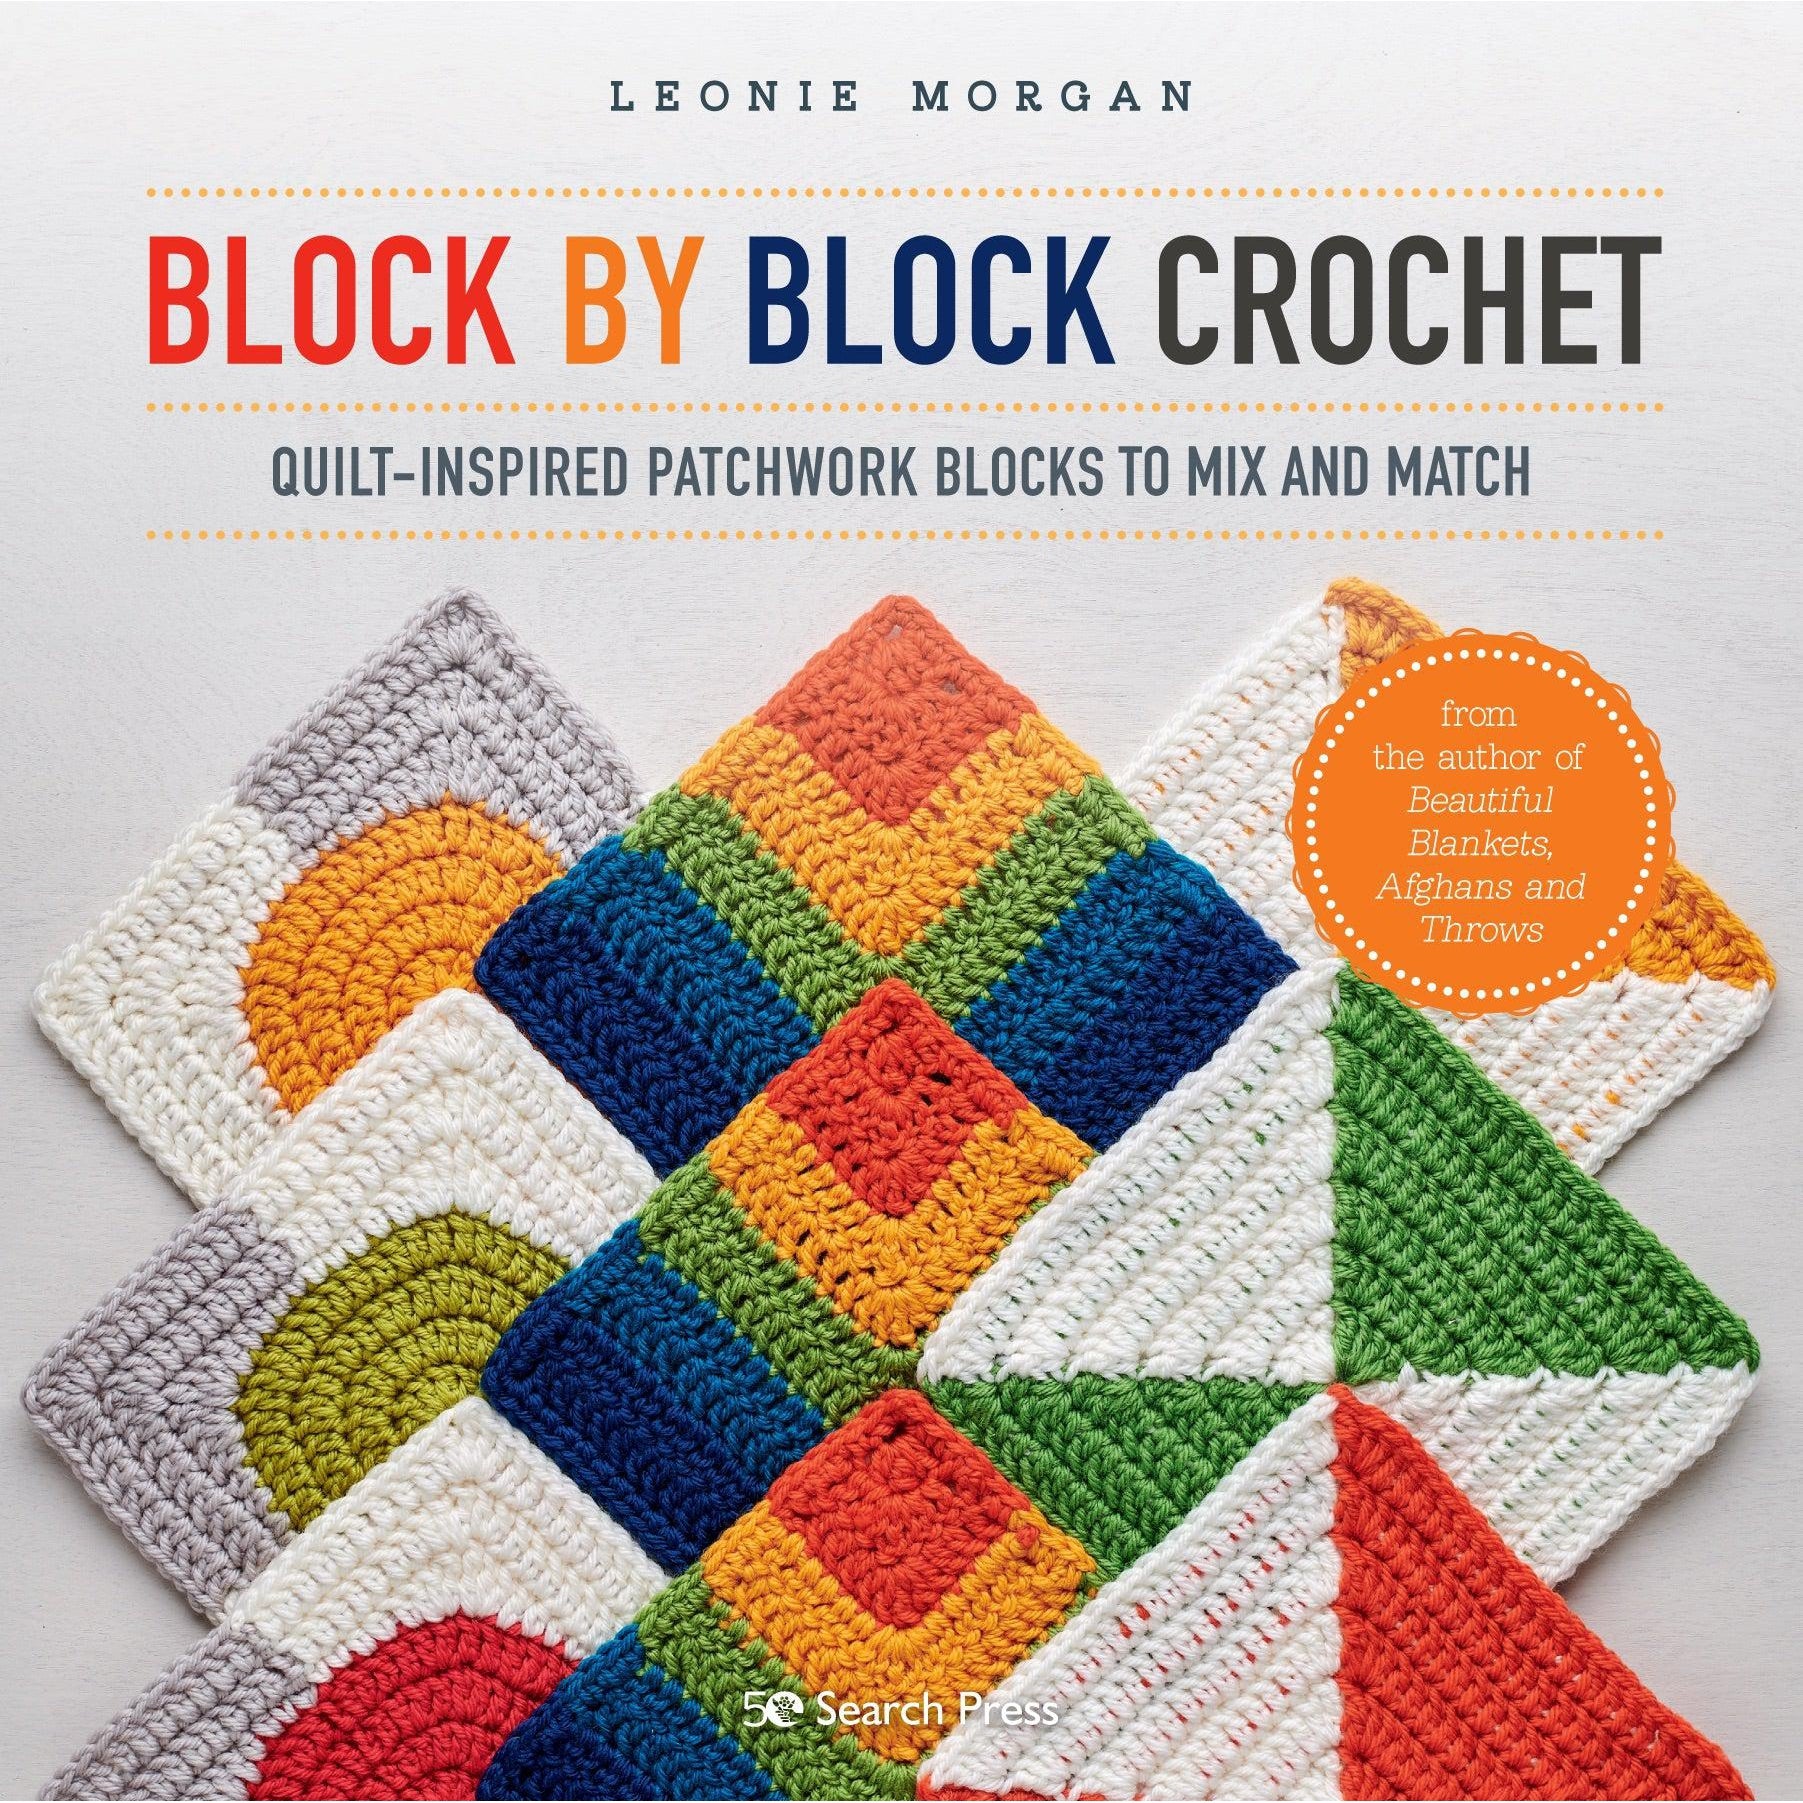 Search Press-Block by Block Crochet-book-gather here online